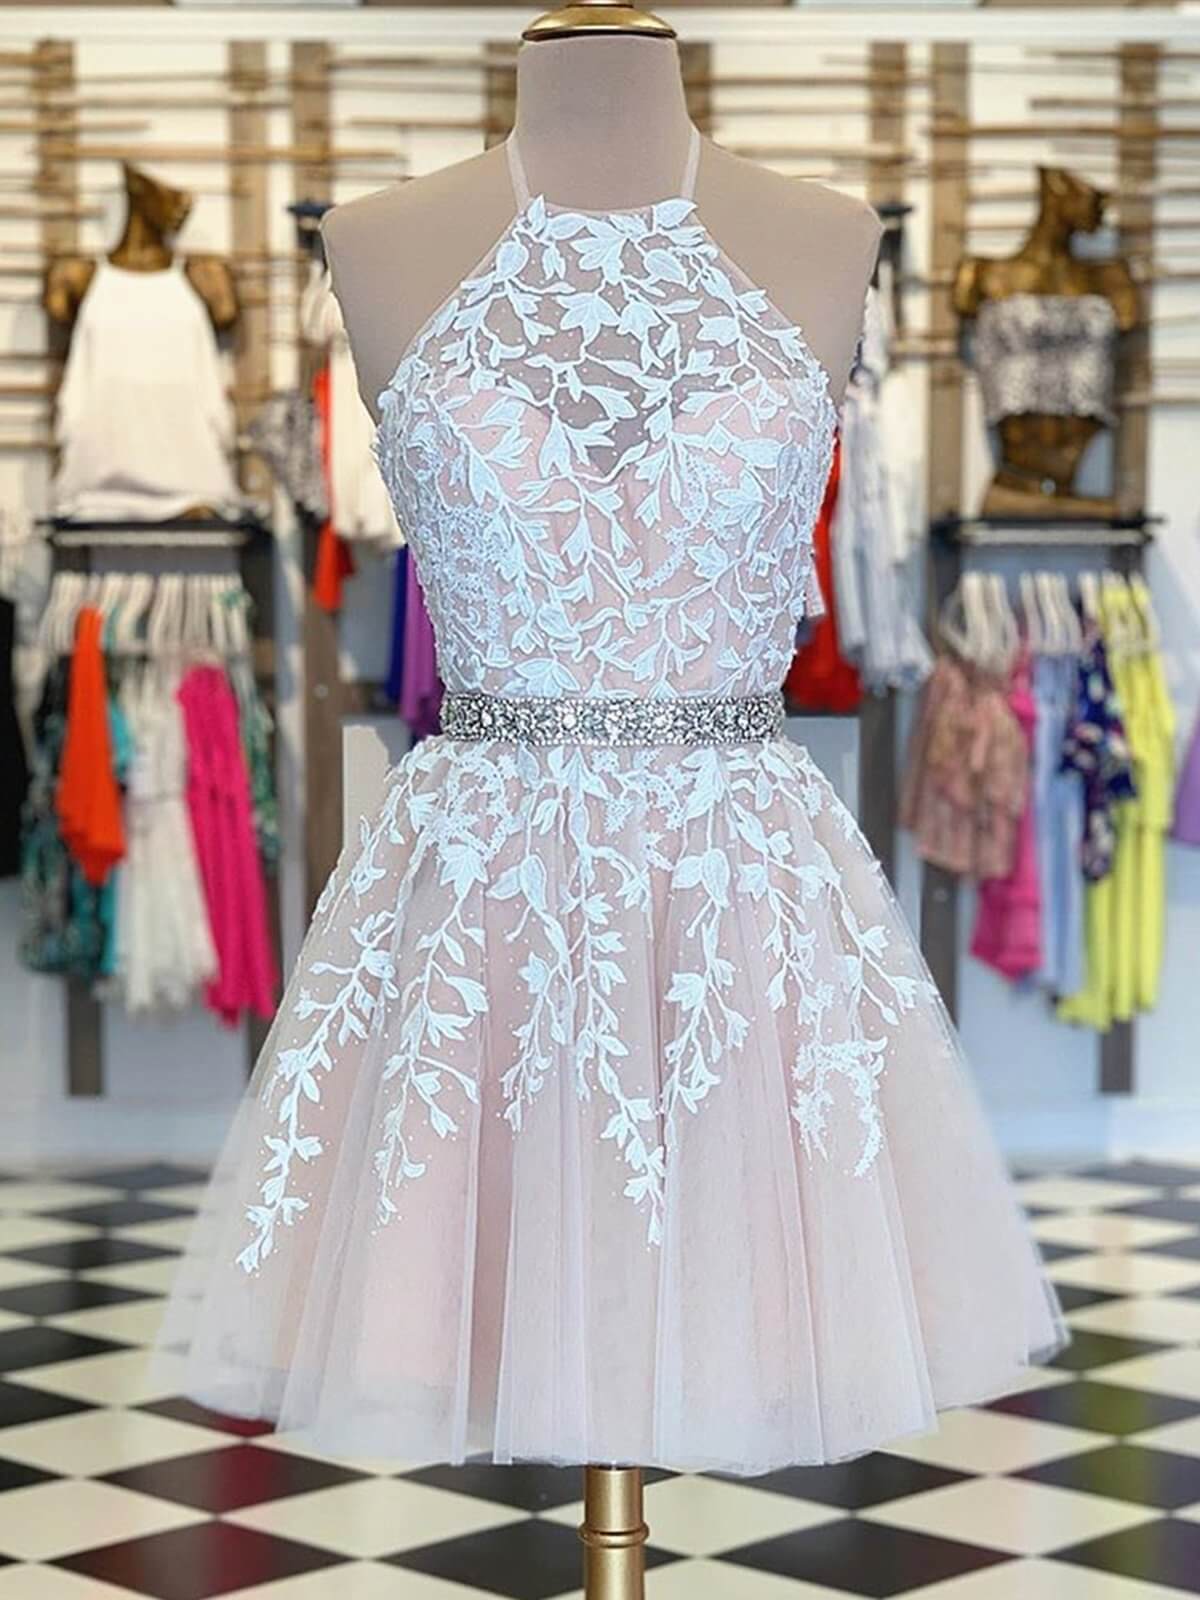 Prom Dresses2029, A Line Halter Neck Short Champagne Lace Prom Dresses,Lace Formal Homecoming Dress